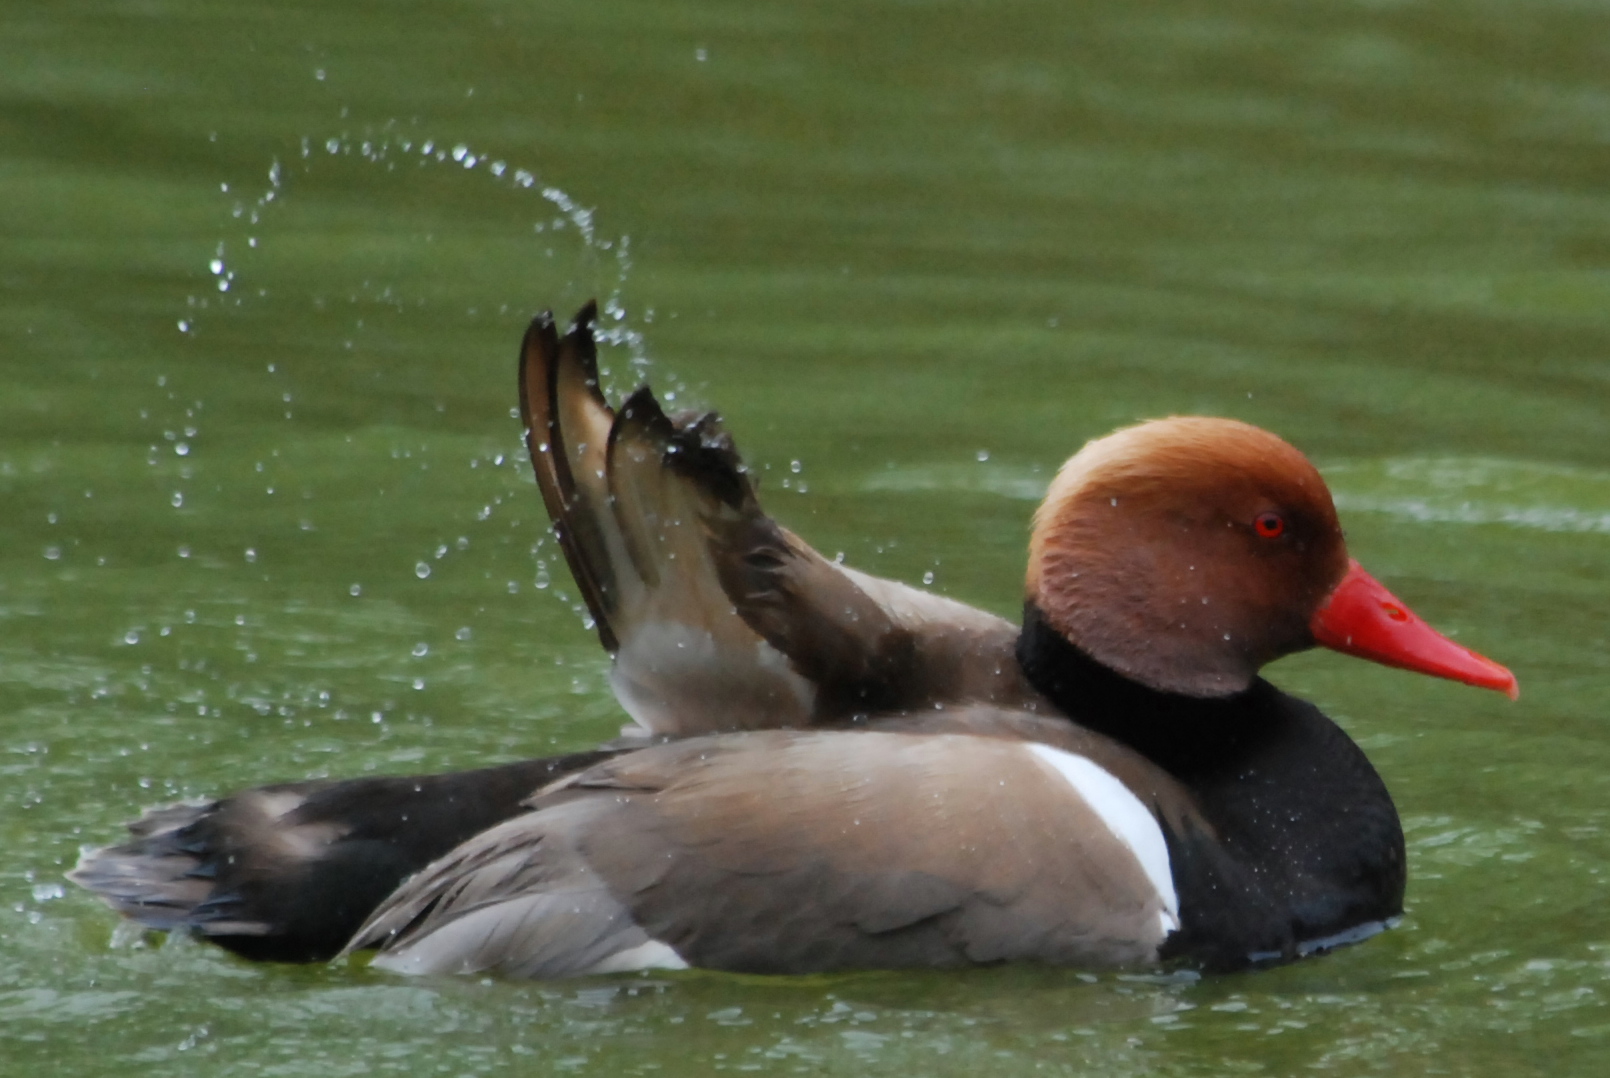 Click picture to see more Red-crested Pochards.